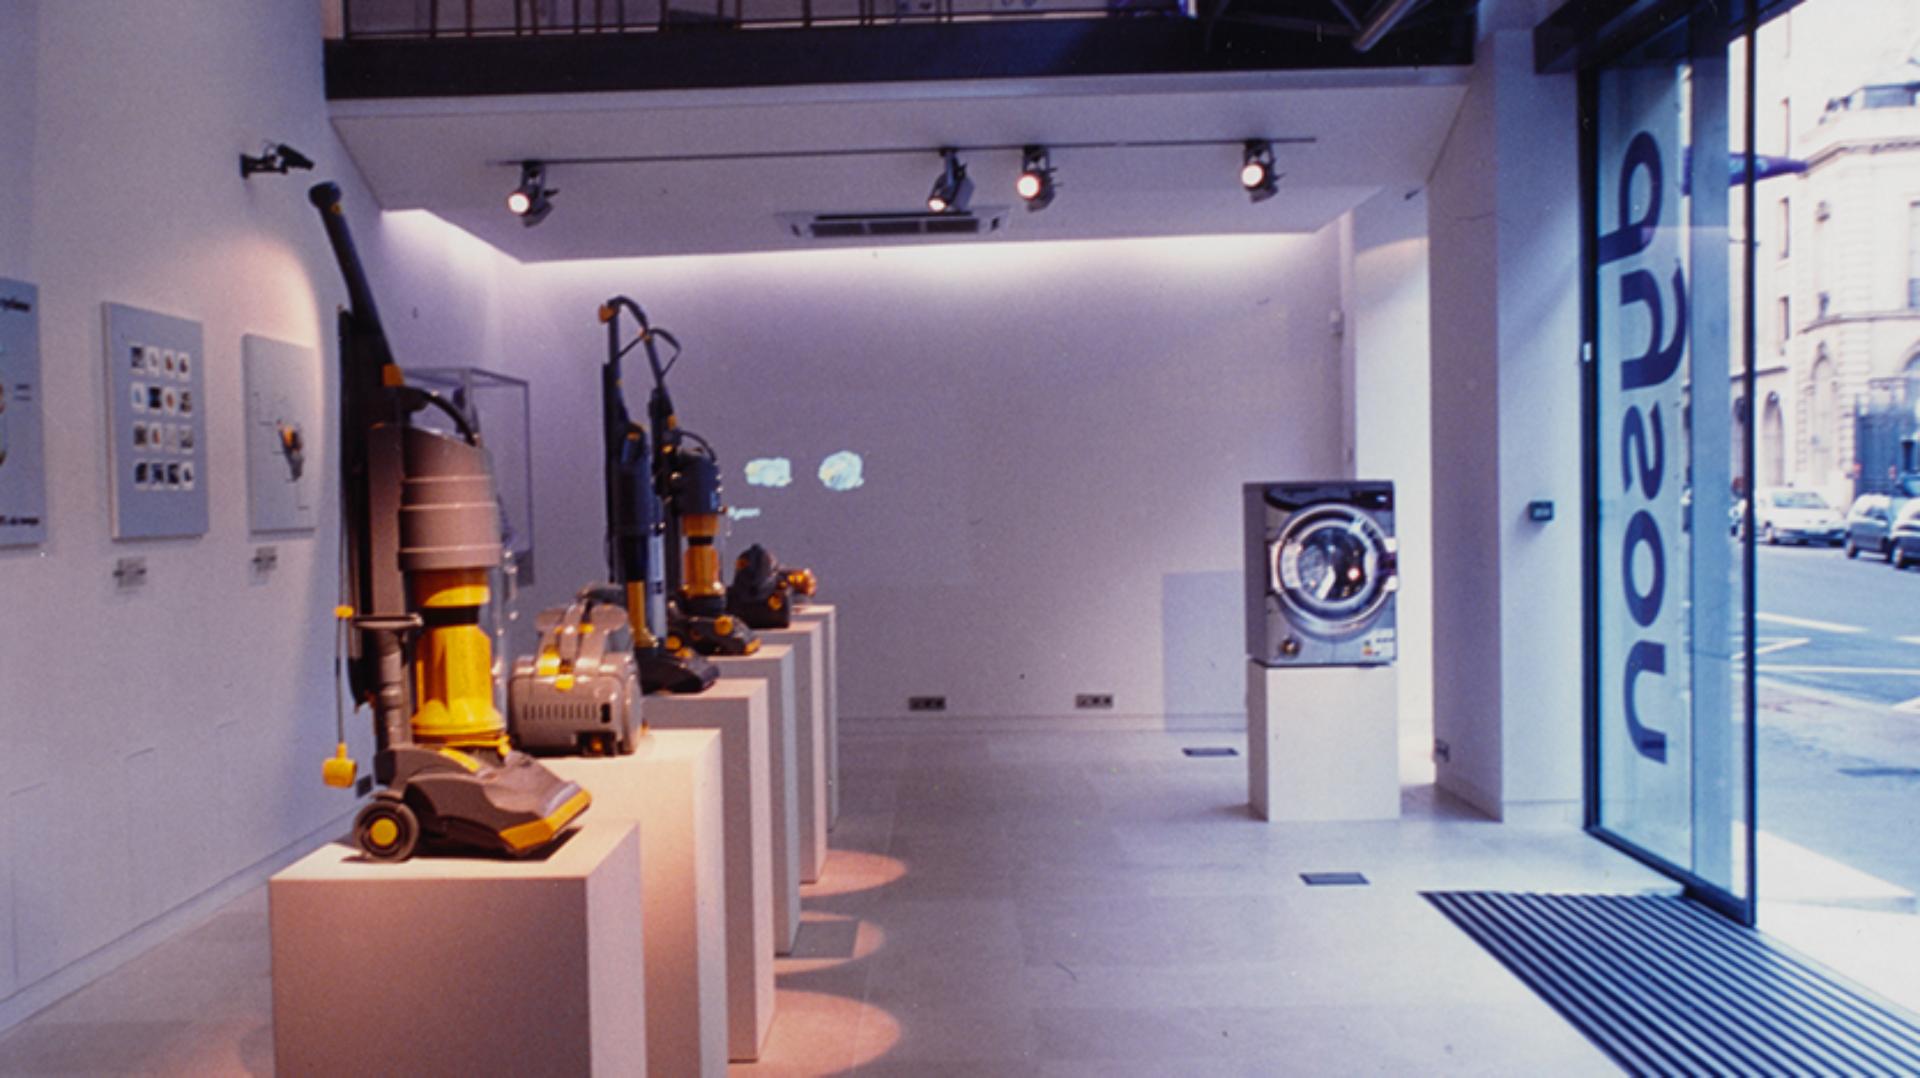 Inside the first Dyson store in Paris